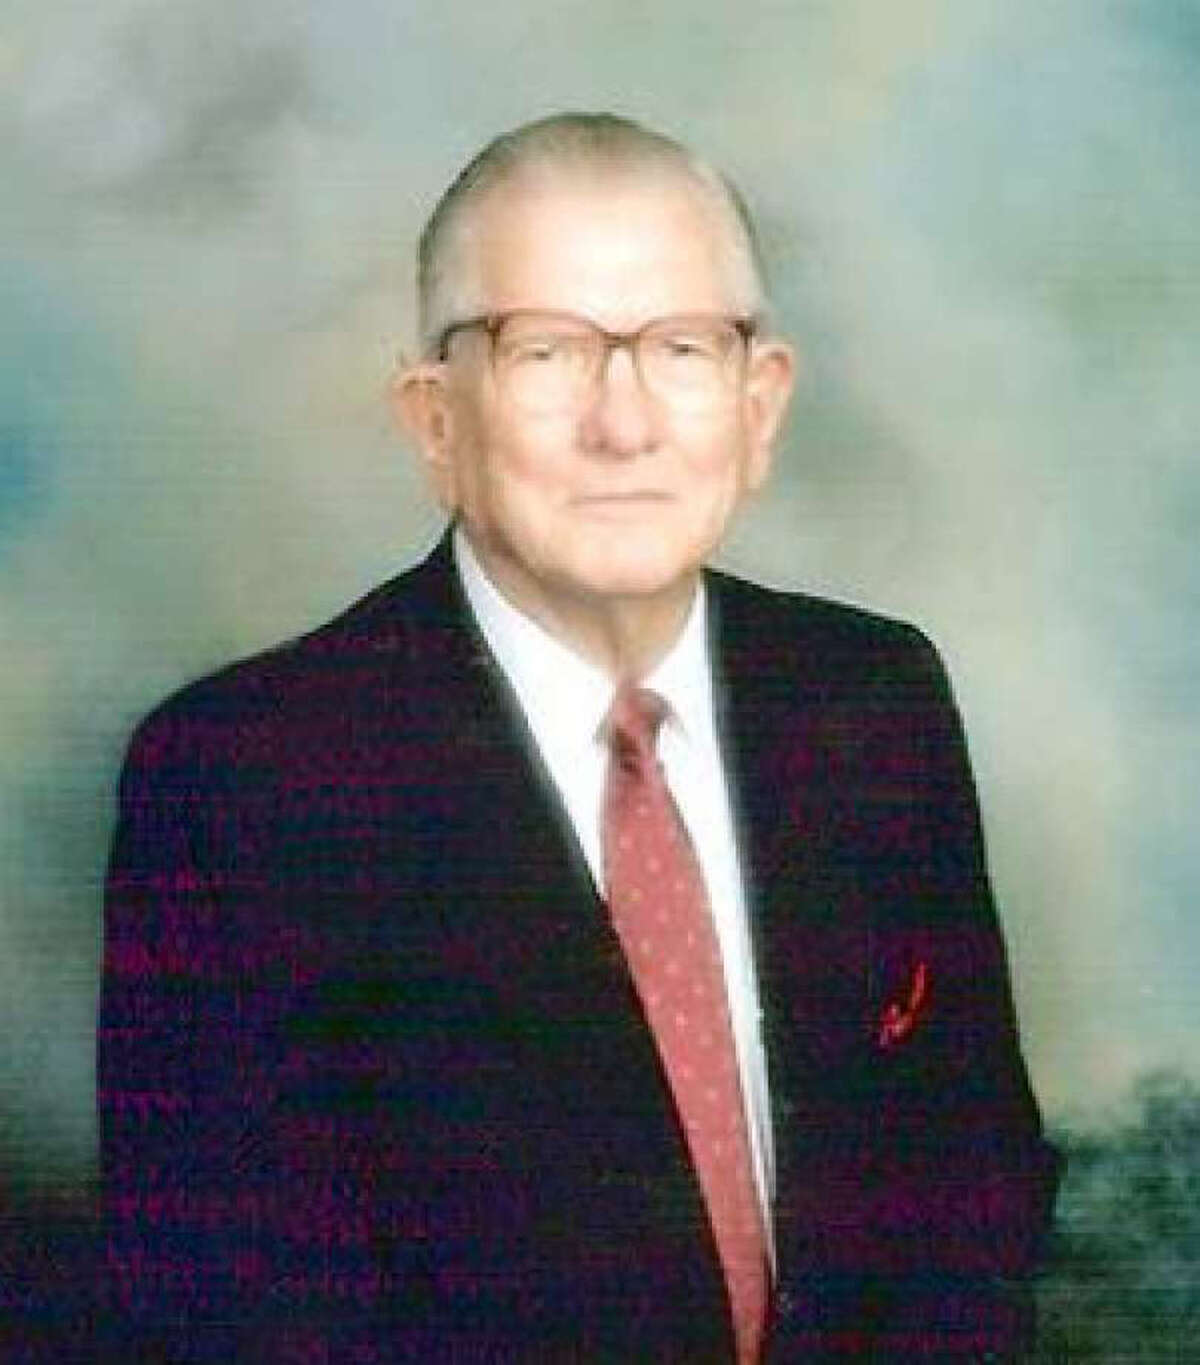 Banker Seth Dorbandt touched many lives and was involved in many civic and professional organizations during his life in Conroe.